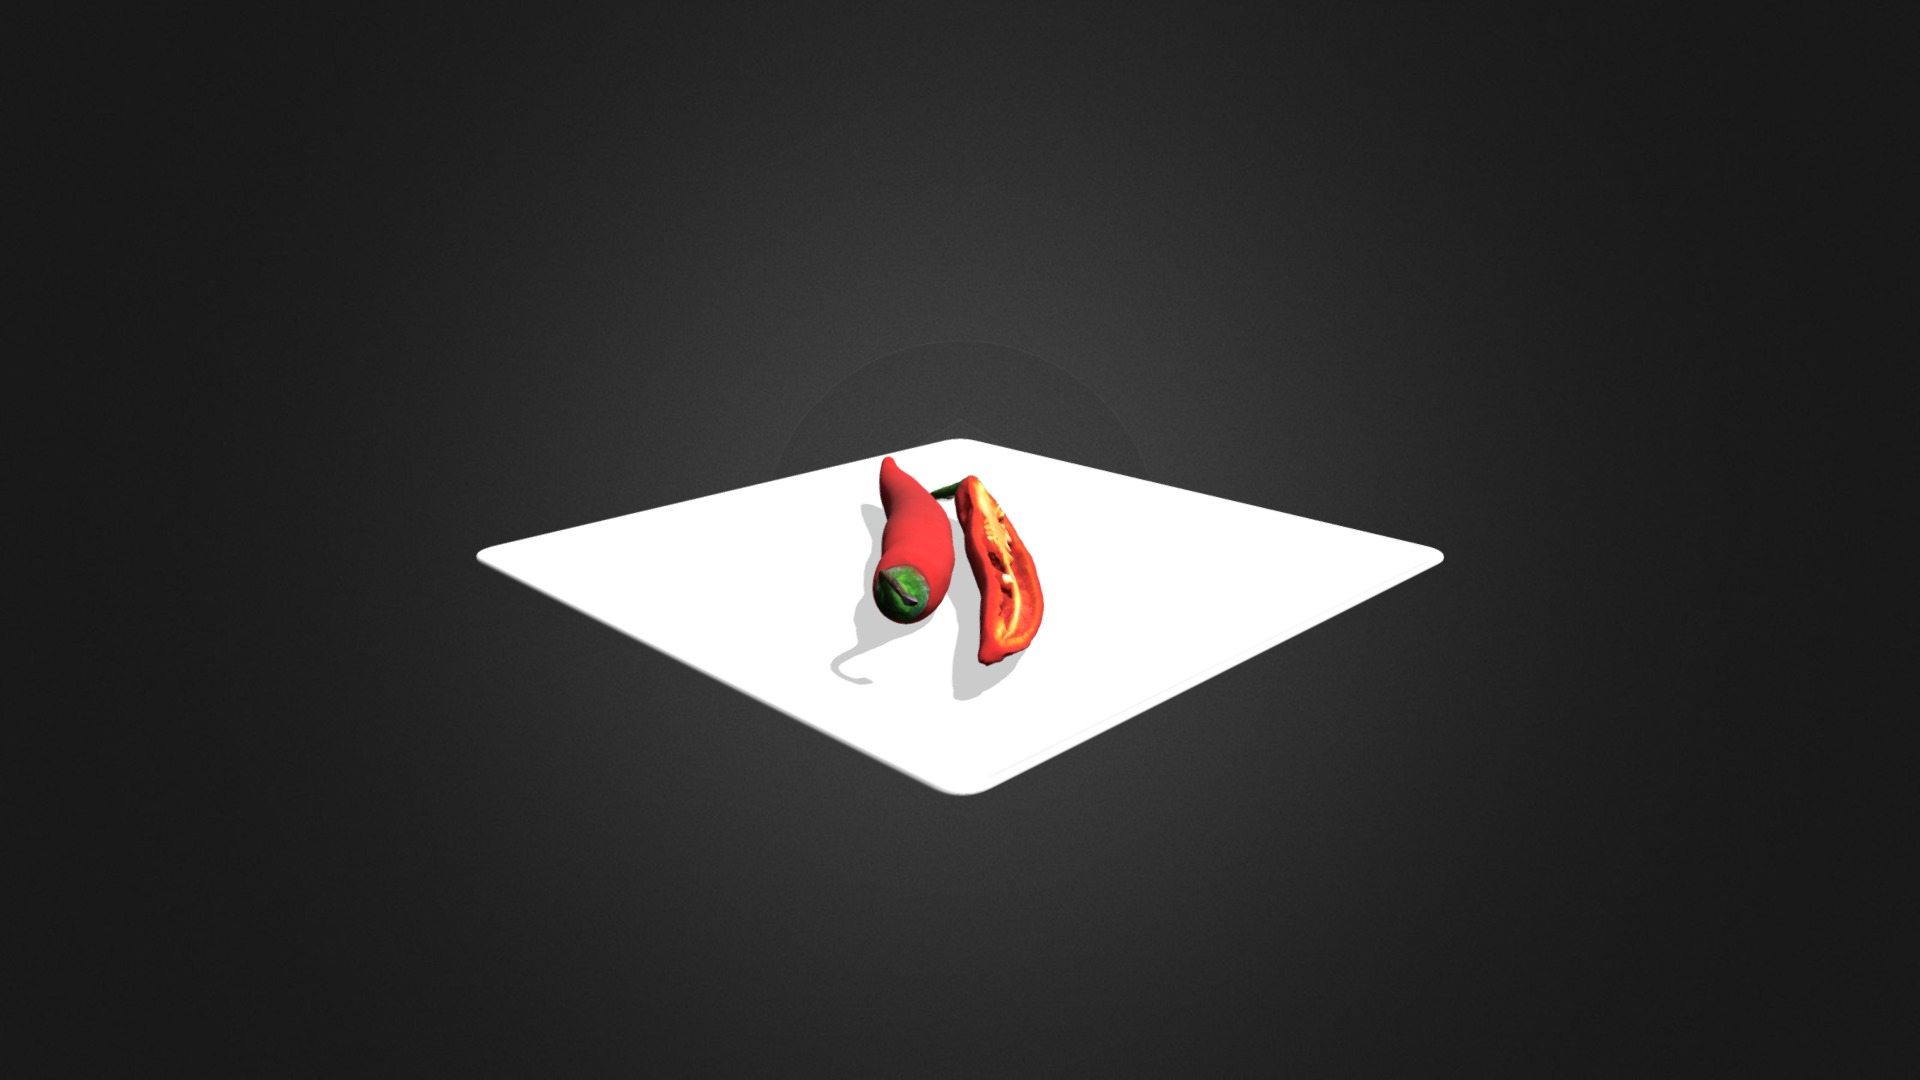 3D model Chilli Pepper on White Plate - This is a 3D model of the Chilli Pepper on White Plate. The 3D model is about a white paper with a red and white bird on it.